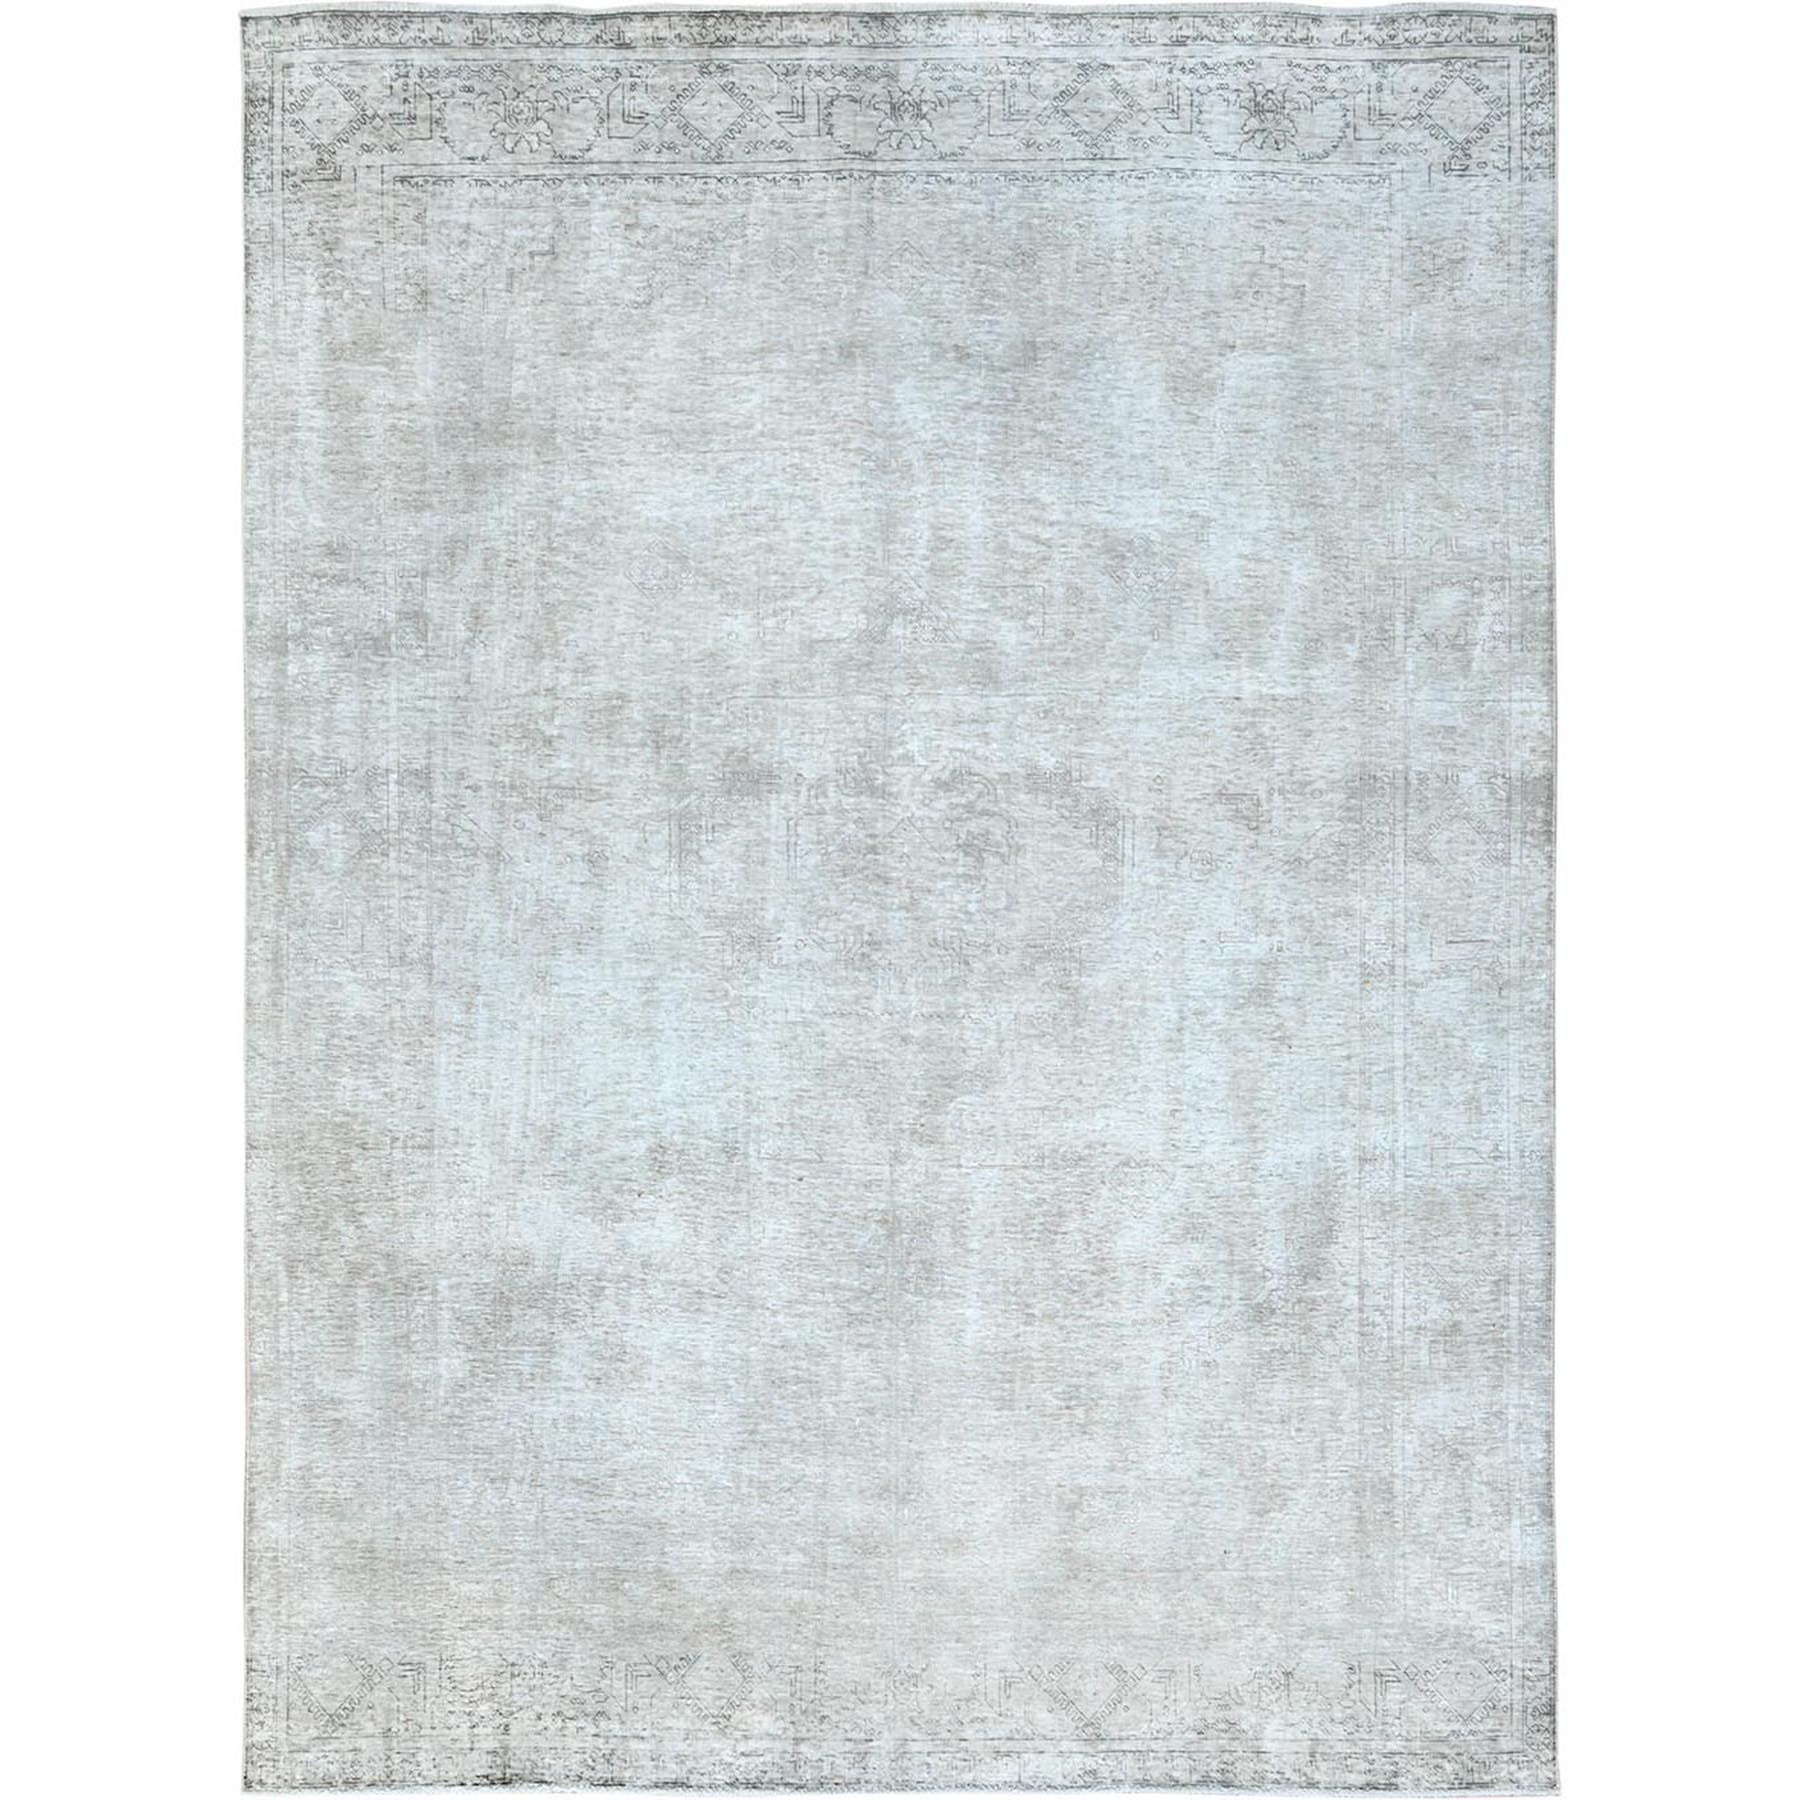  Wool Hand-Knotted Area Rug 9'6